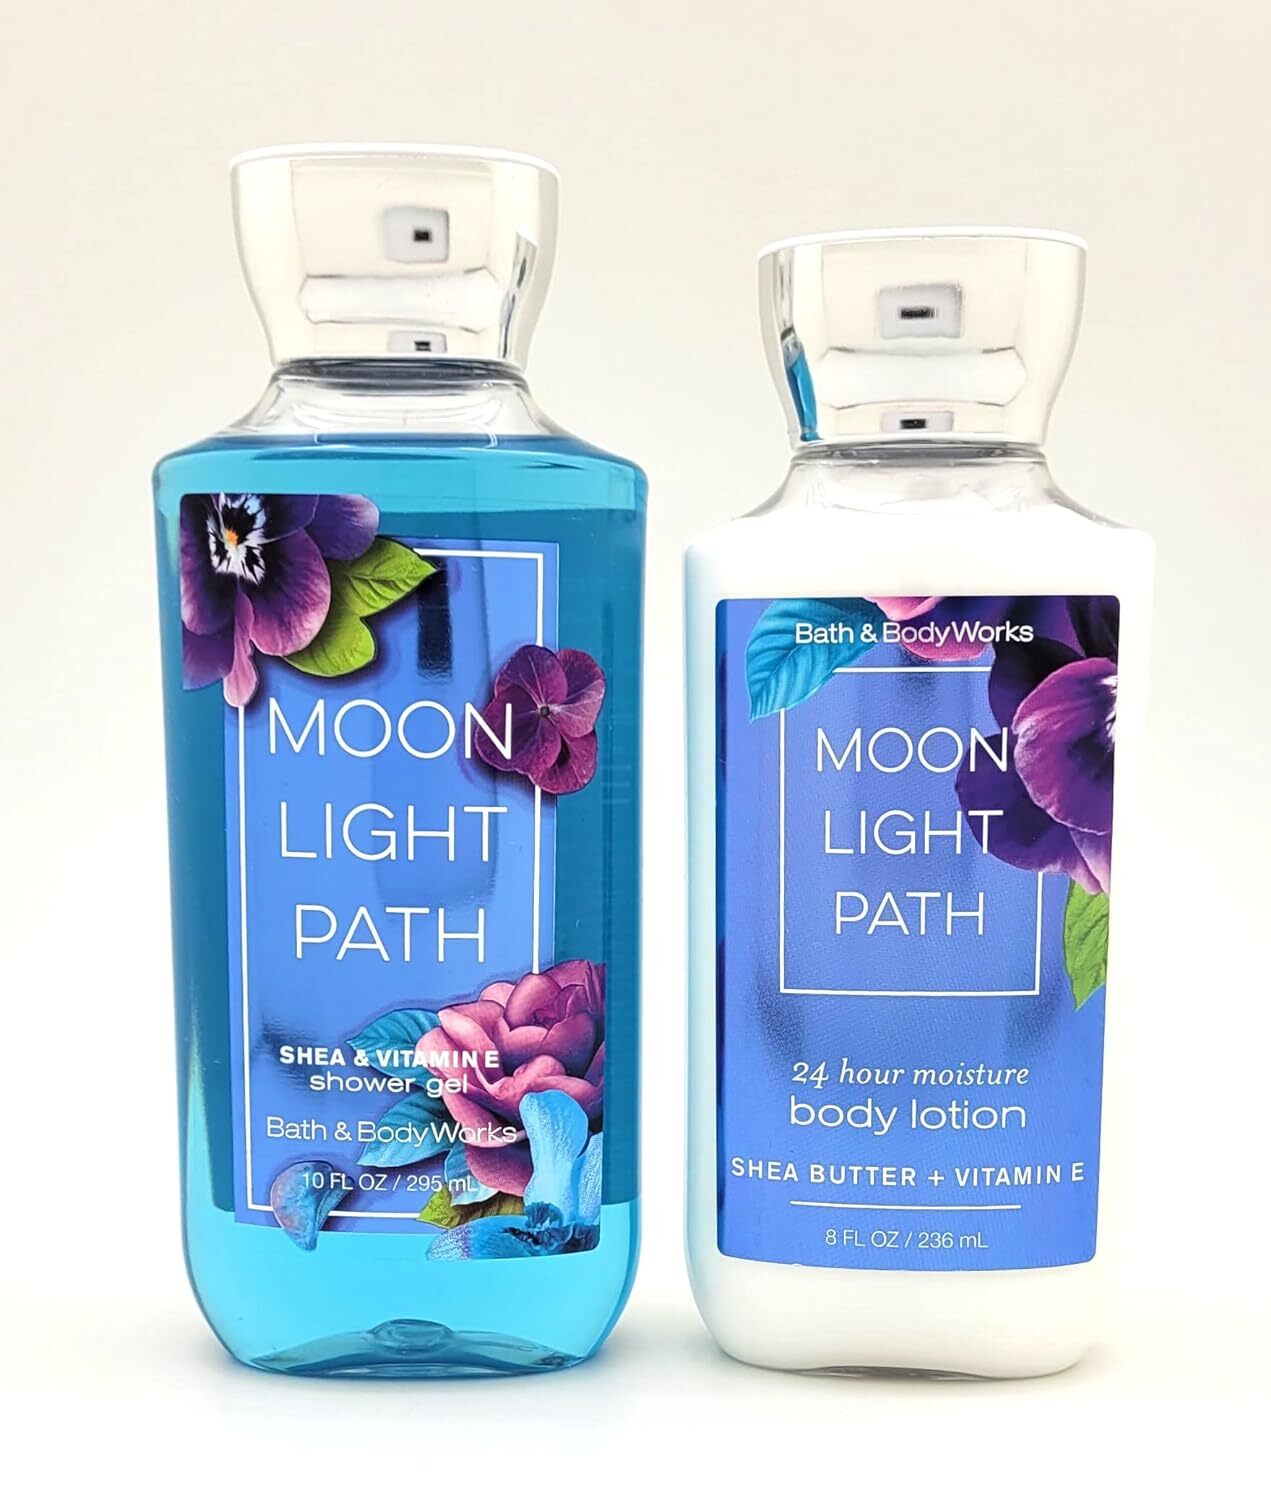 Bath and Body Works Signature Classics Pleasures Collection Body Lotion and Shower Gel Gift Set Men or Women (Moonlight Path)